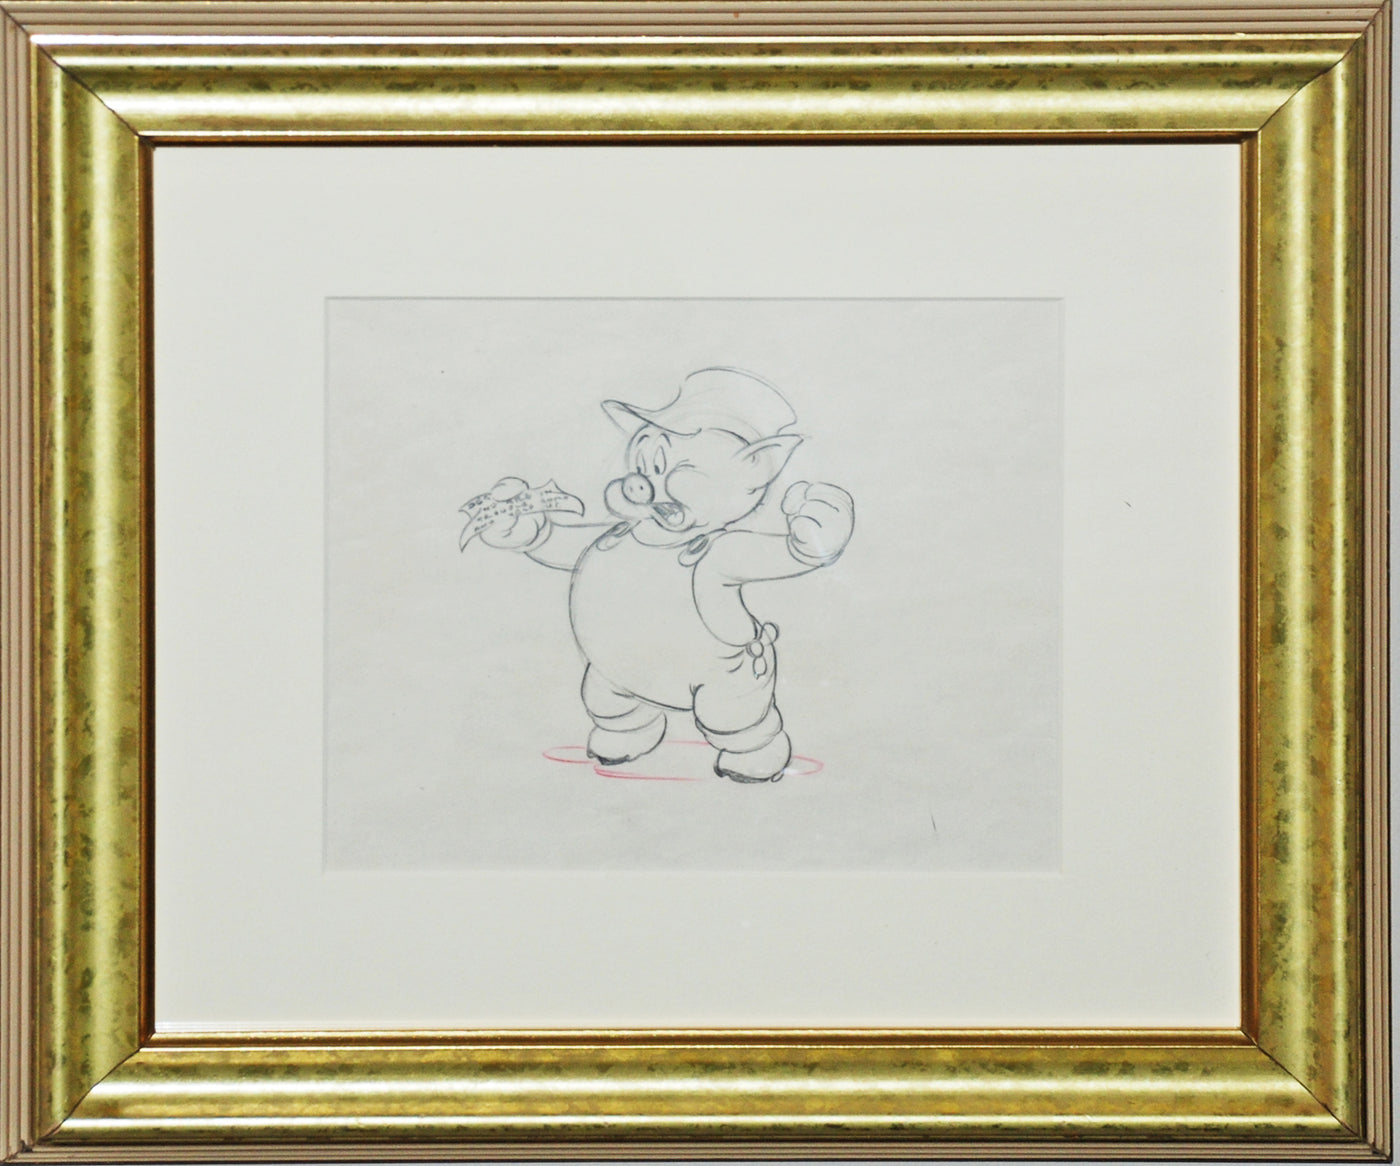 Original Walt Disney Production Drawing from The Practical Pig